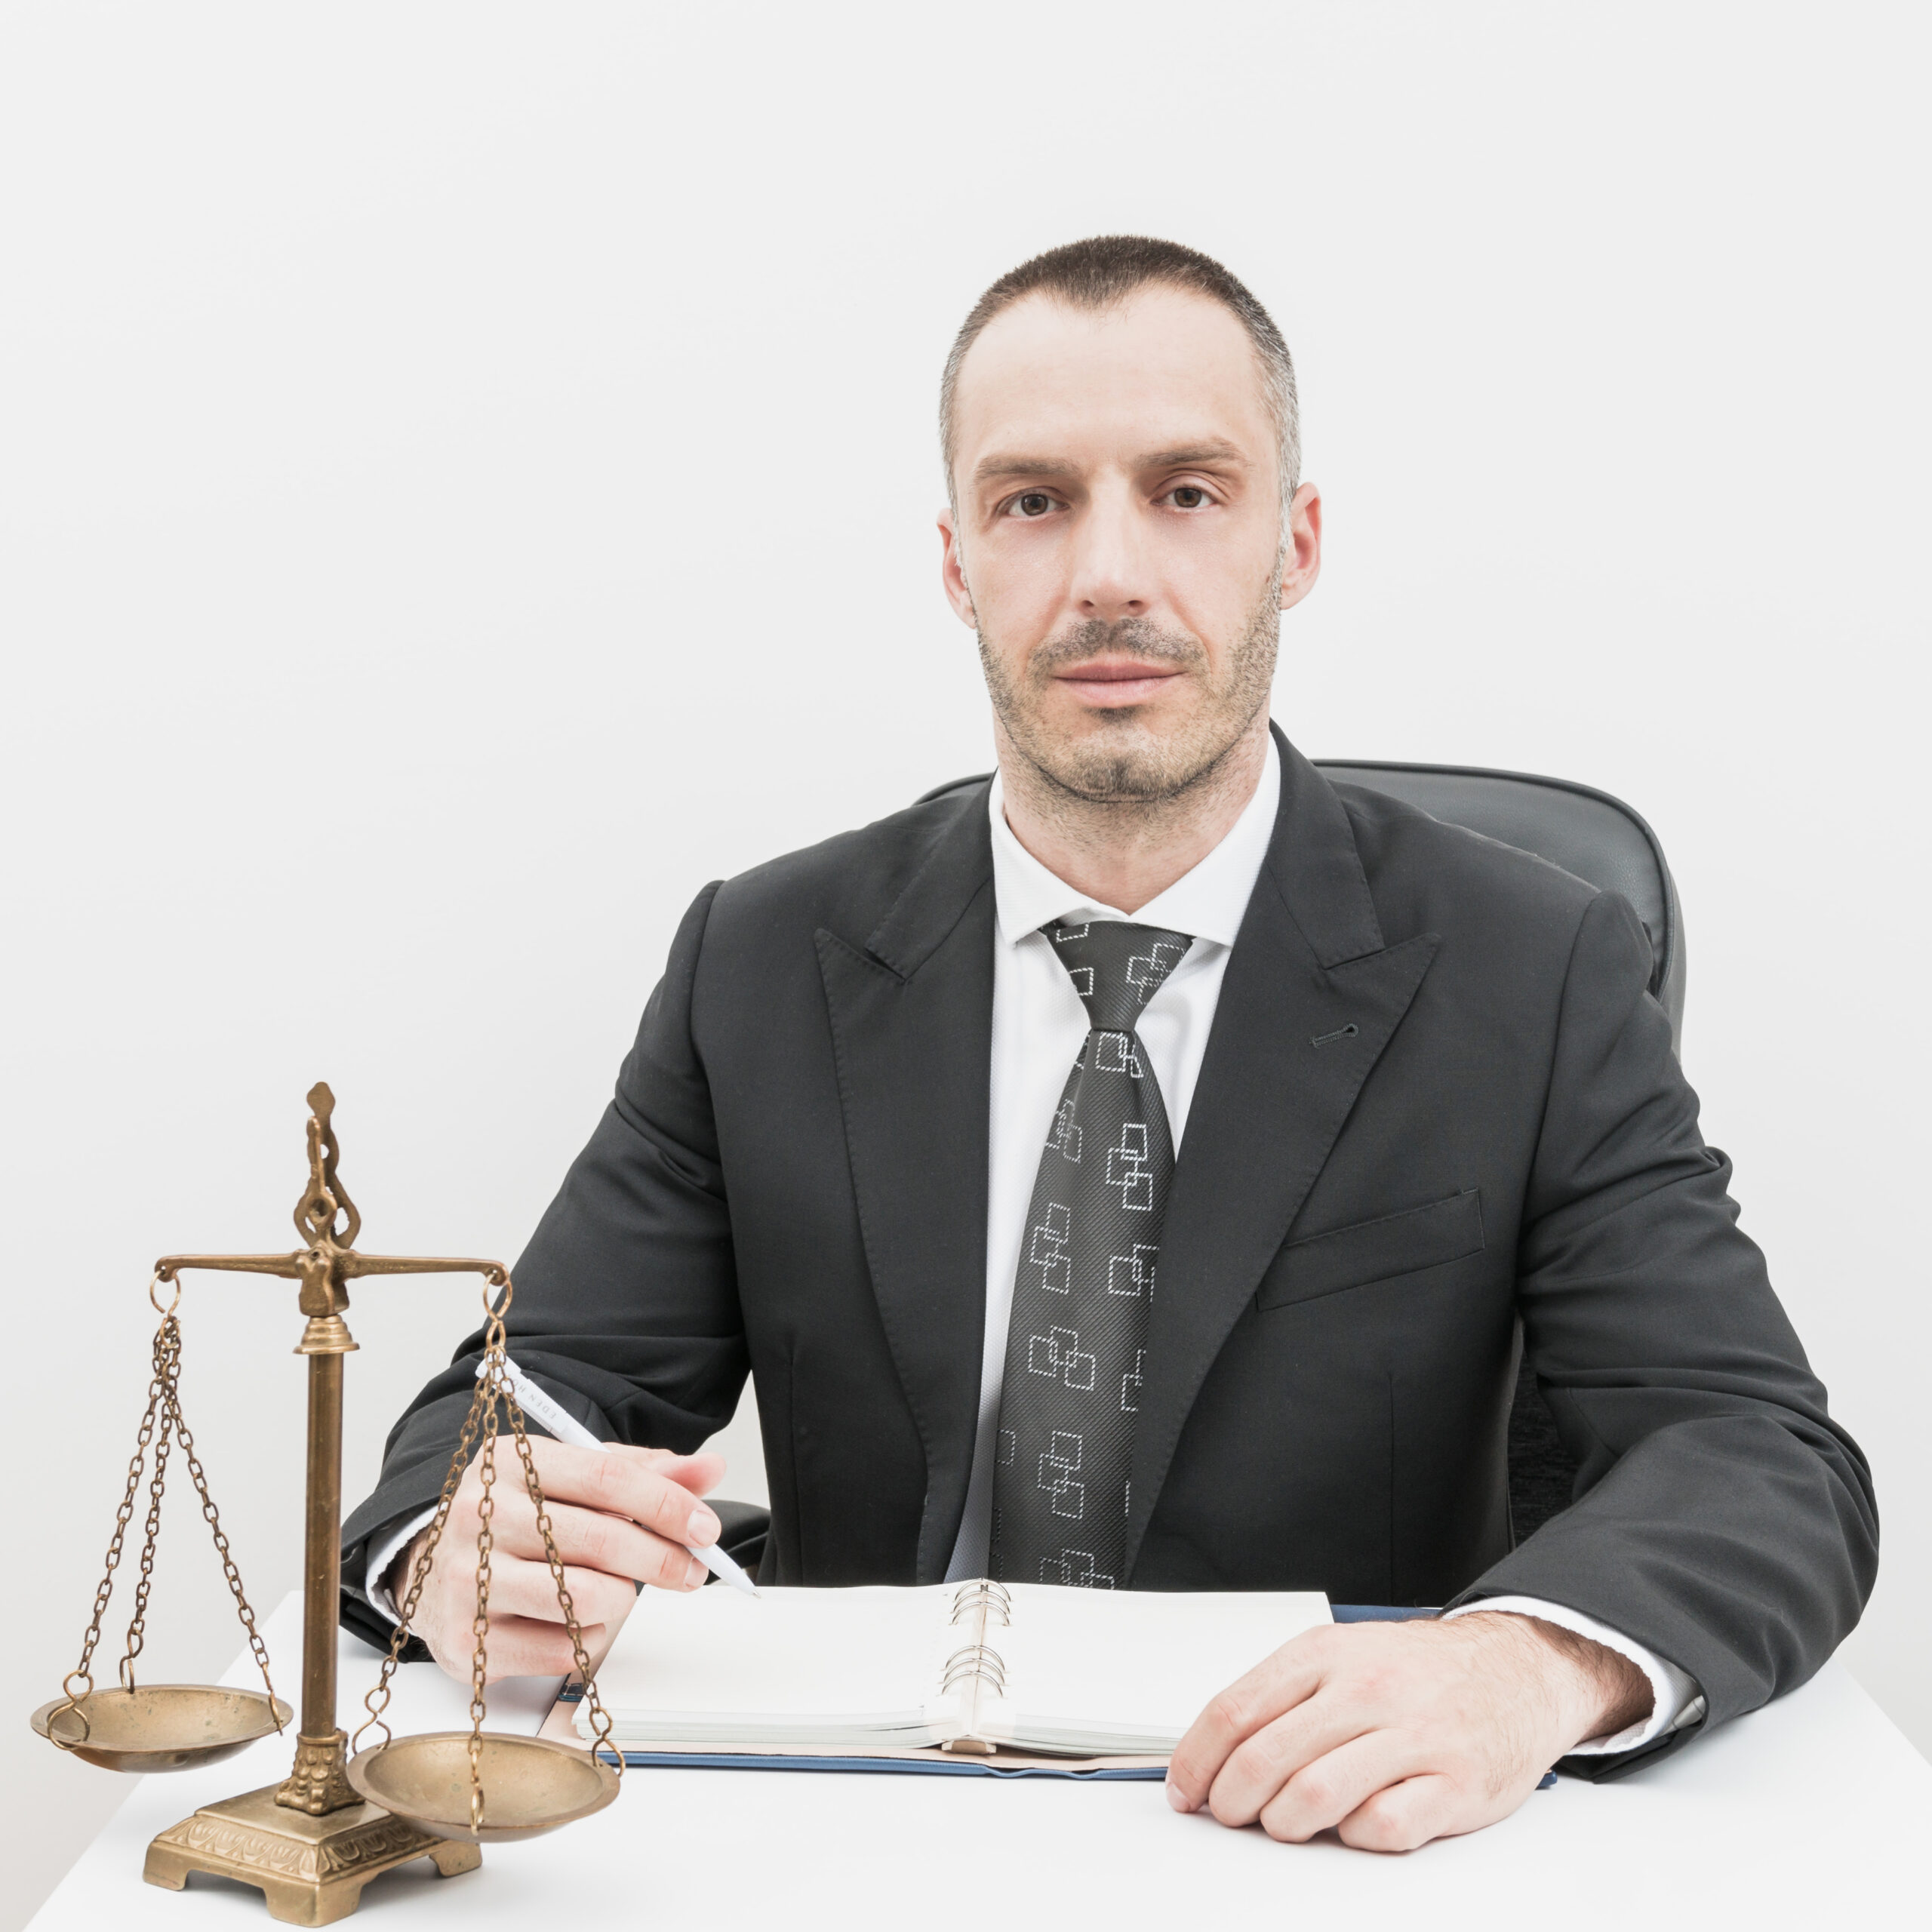 5 Situations When You Need an Immigration Lawyer